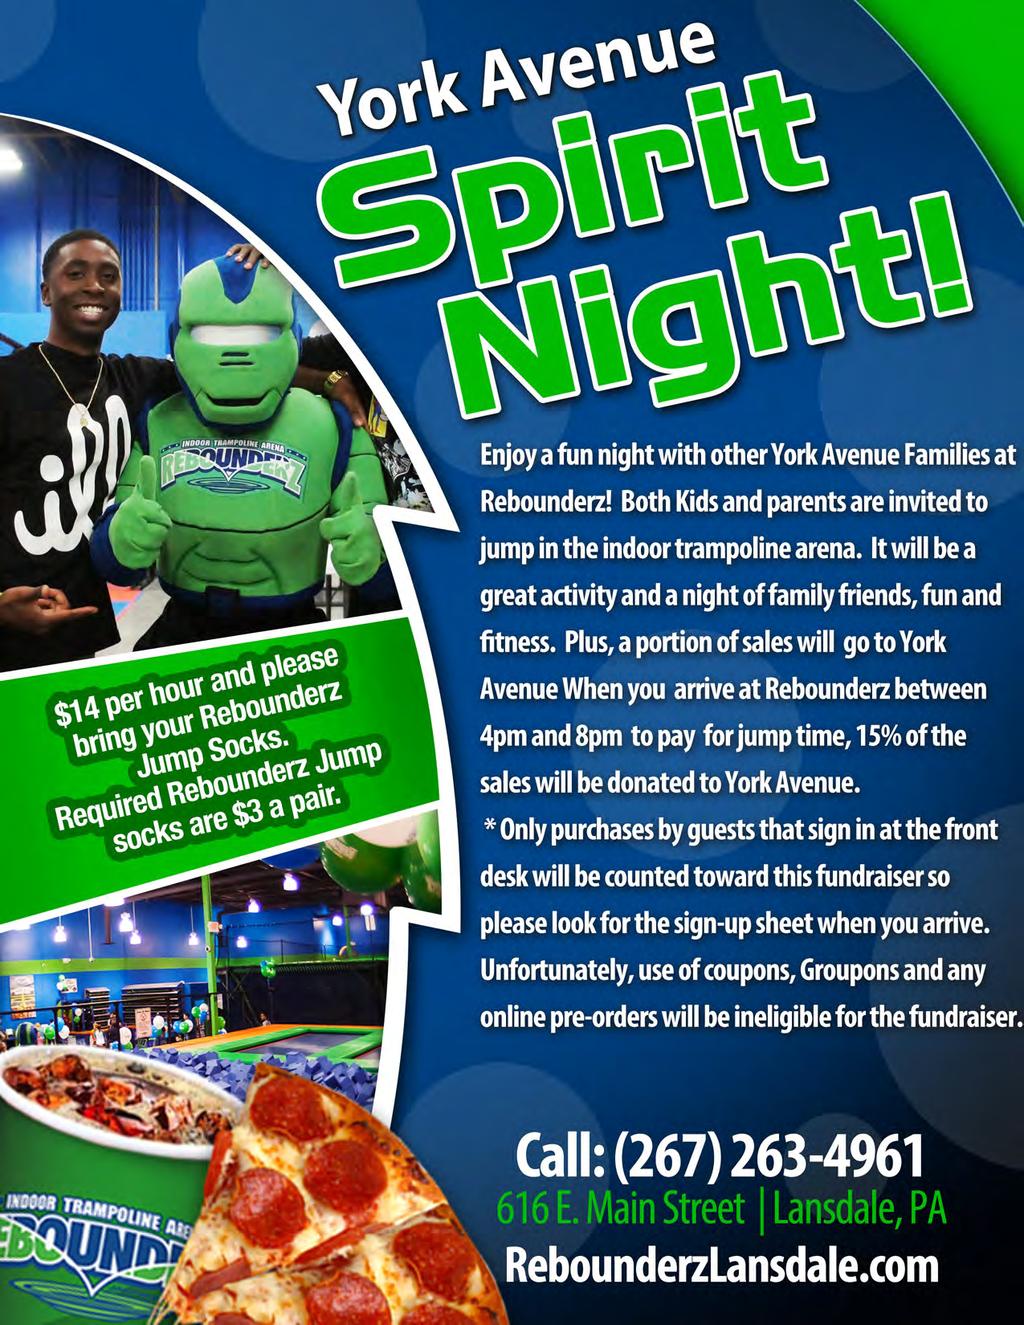 $15 per hour and please bring your Rebounderz Jump Socks. Required Rebounderz Jump Socks are $2 a pair Enjoy a fun night with other MMR Vikings Cheerleading families at Rebounderz!